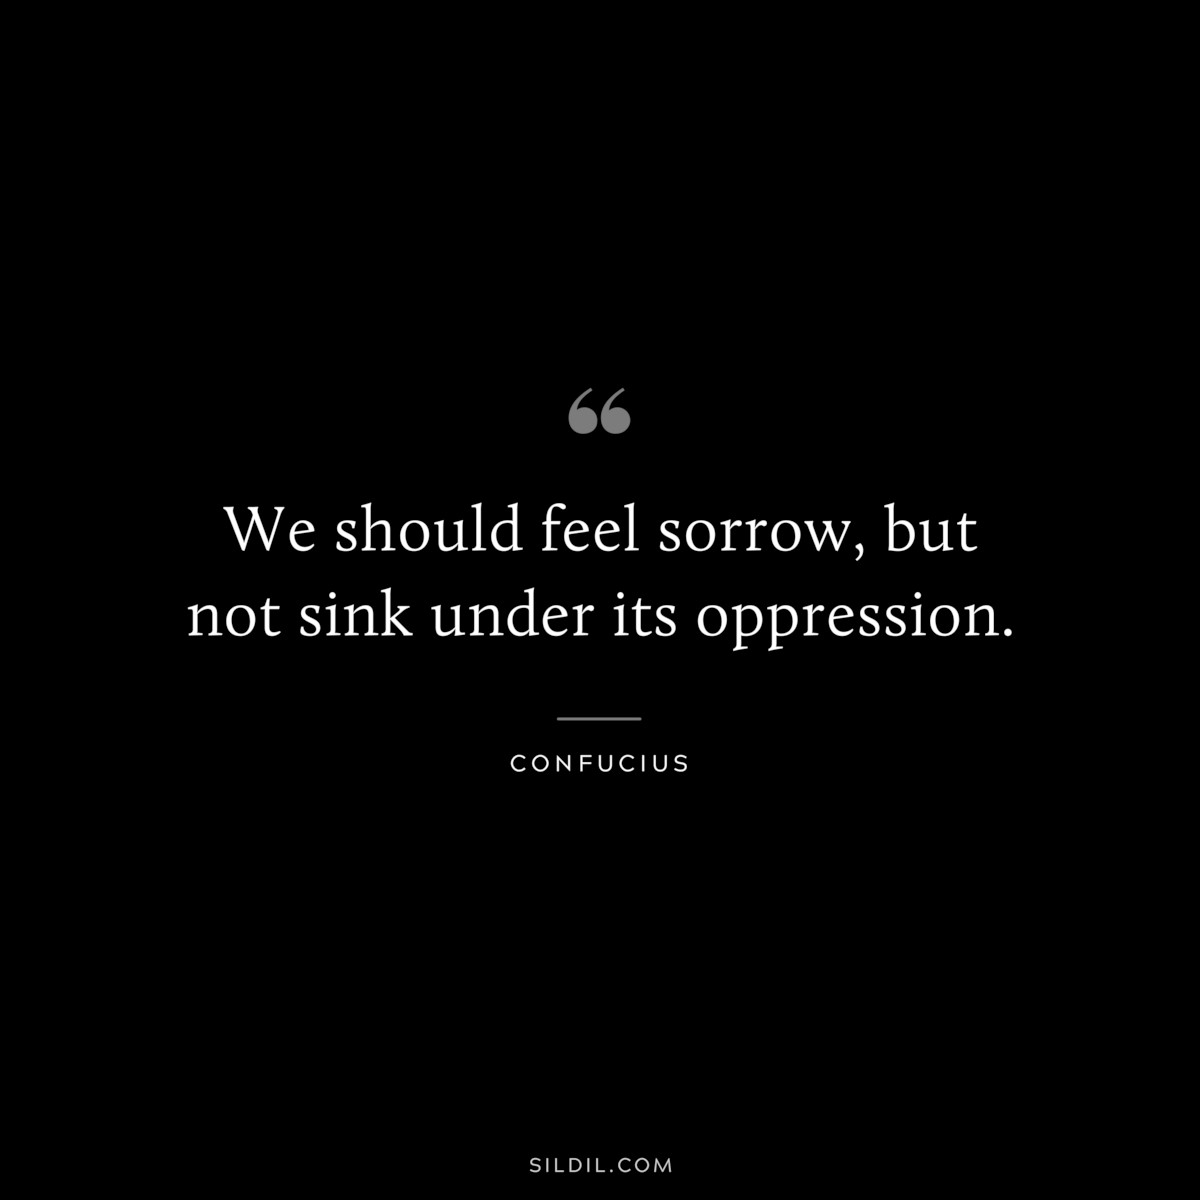 We should feel sorrow, but not sink under its oppression. ― Confucius